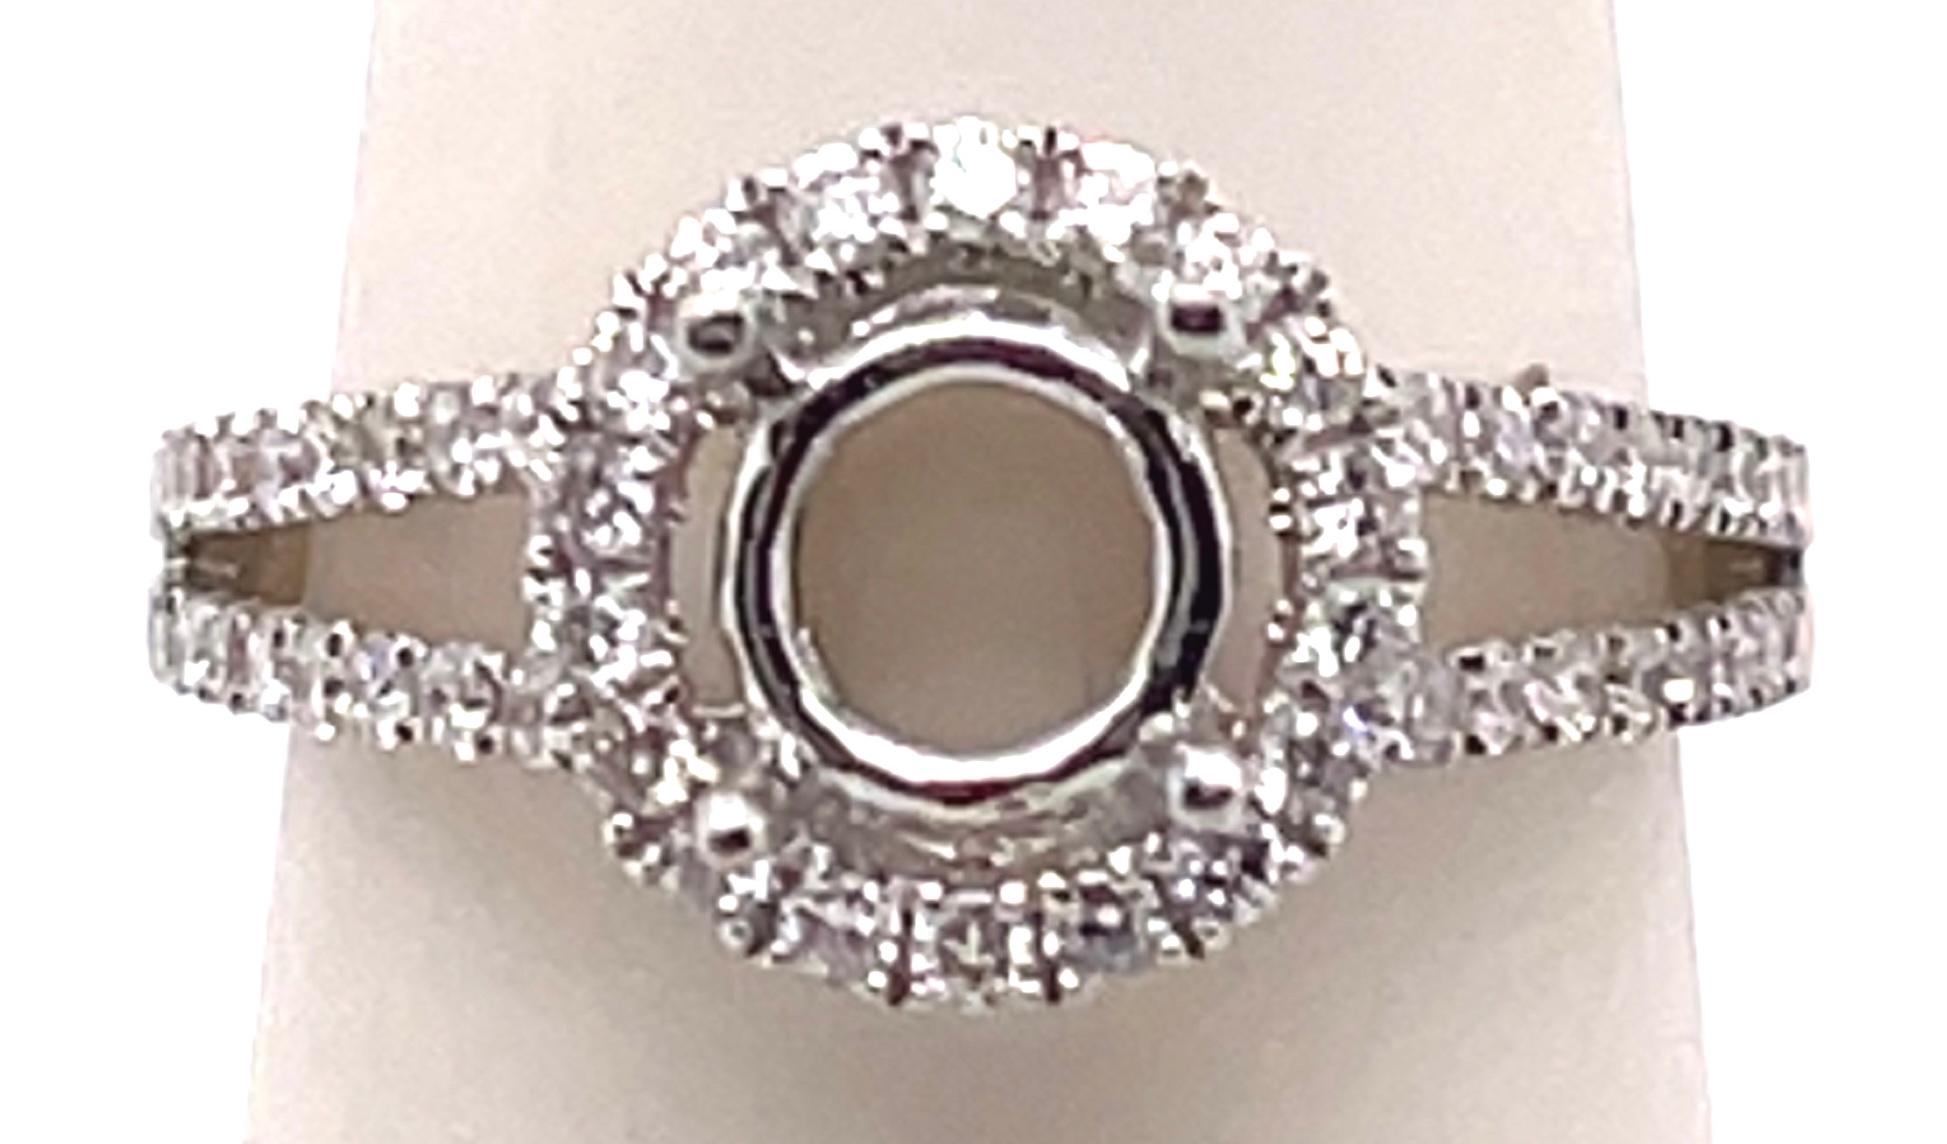 18 Karat White Gold round engagement ring setting with diamond halo and two row diamond band.
Size 6.5
0.71 total diamond weight.
3.72 grams total weight.
